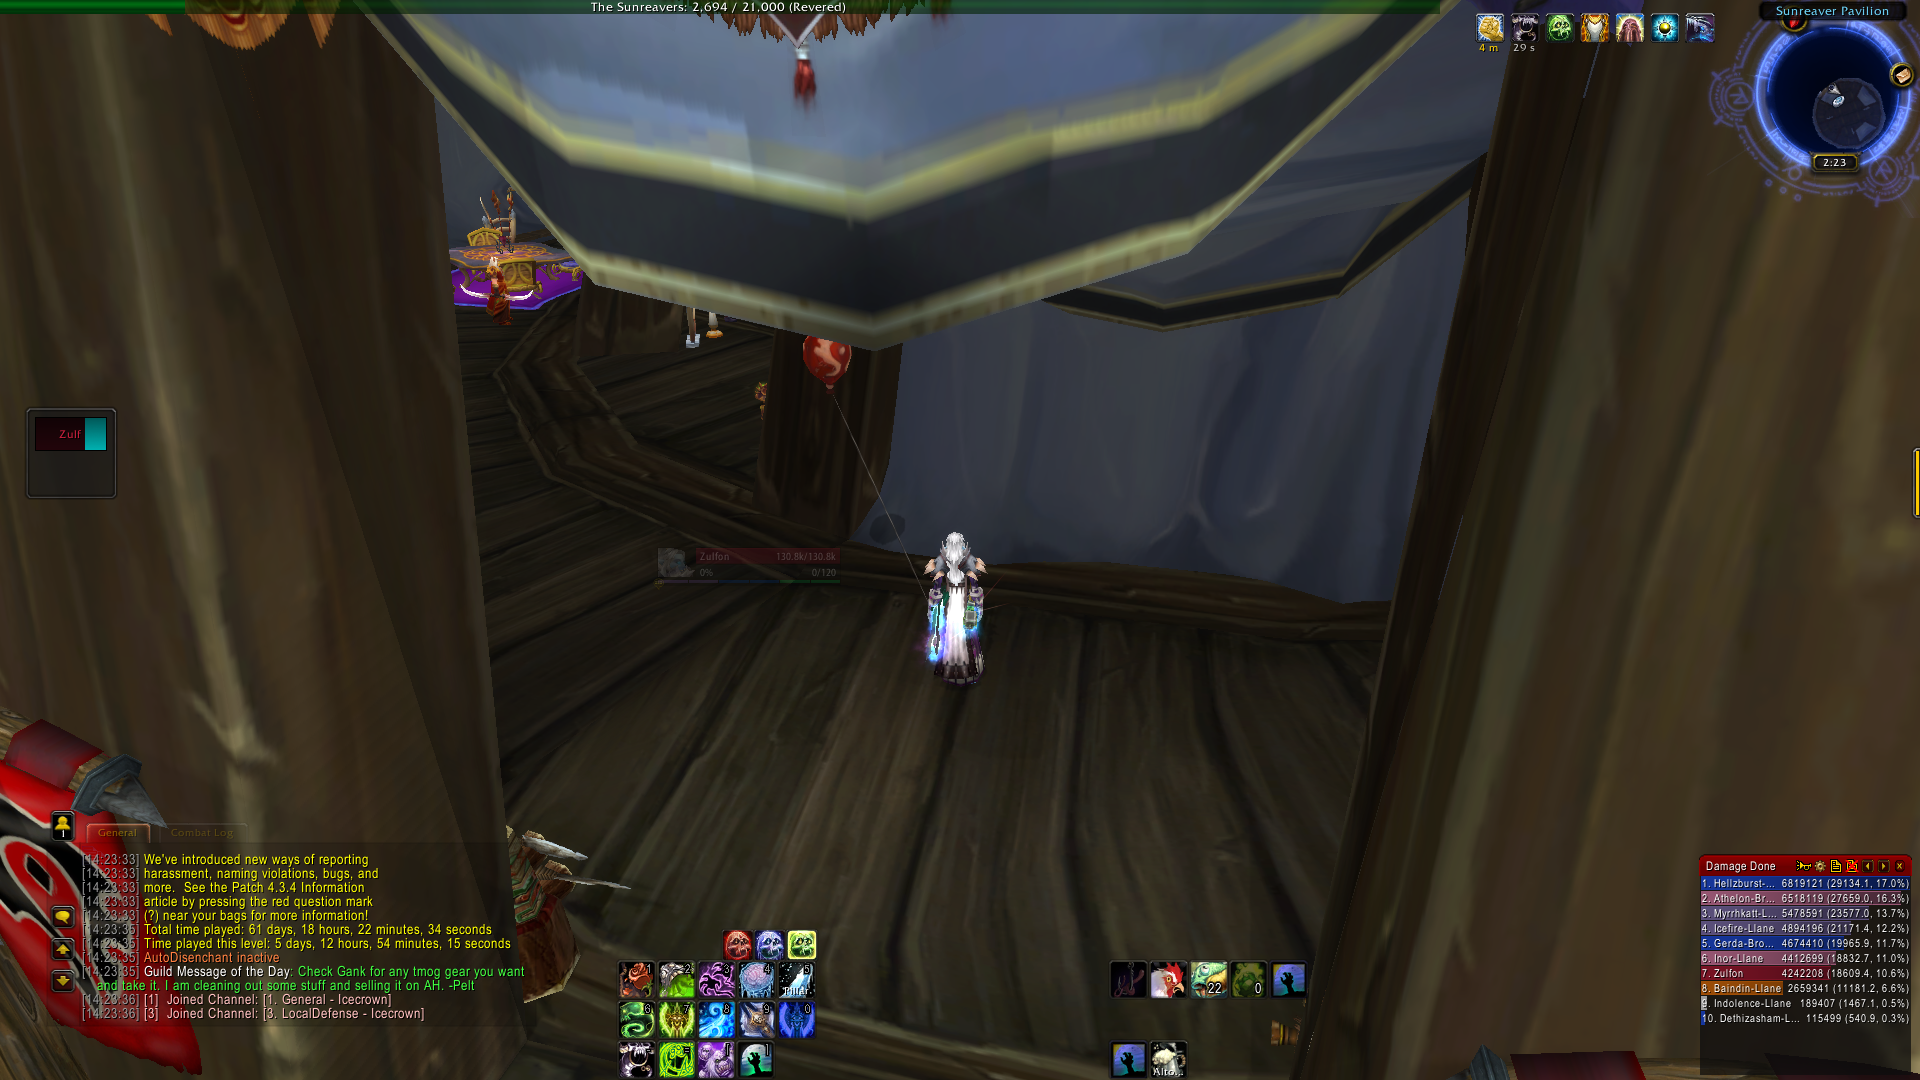 Oh, the addons you can't even see